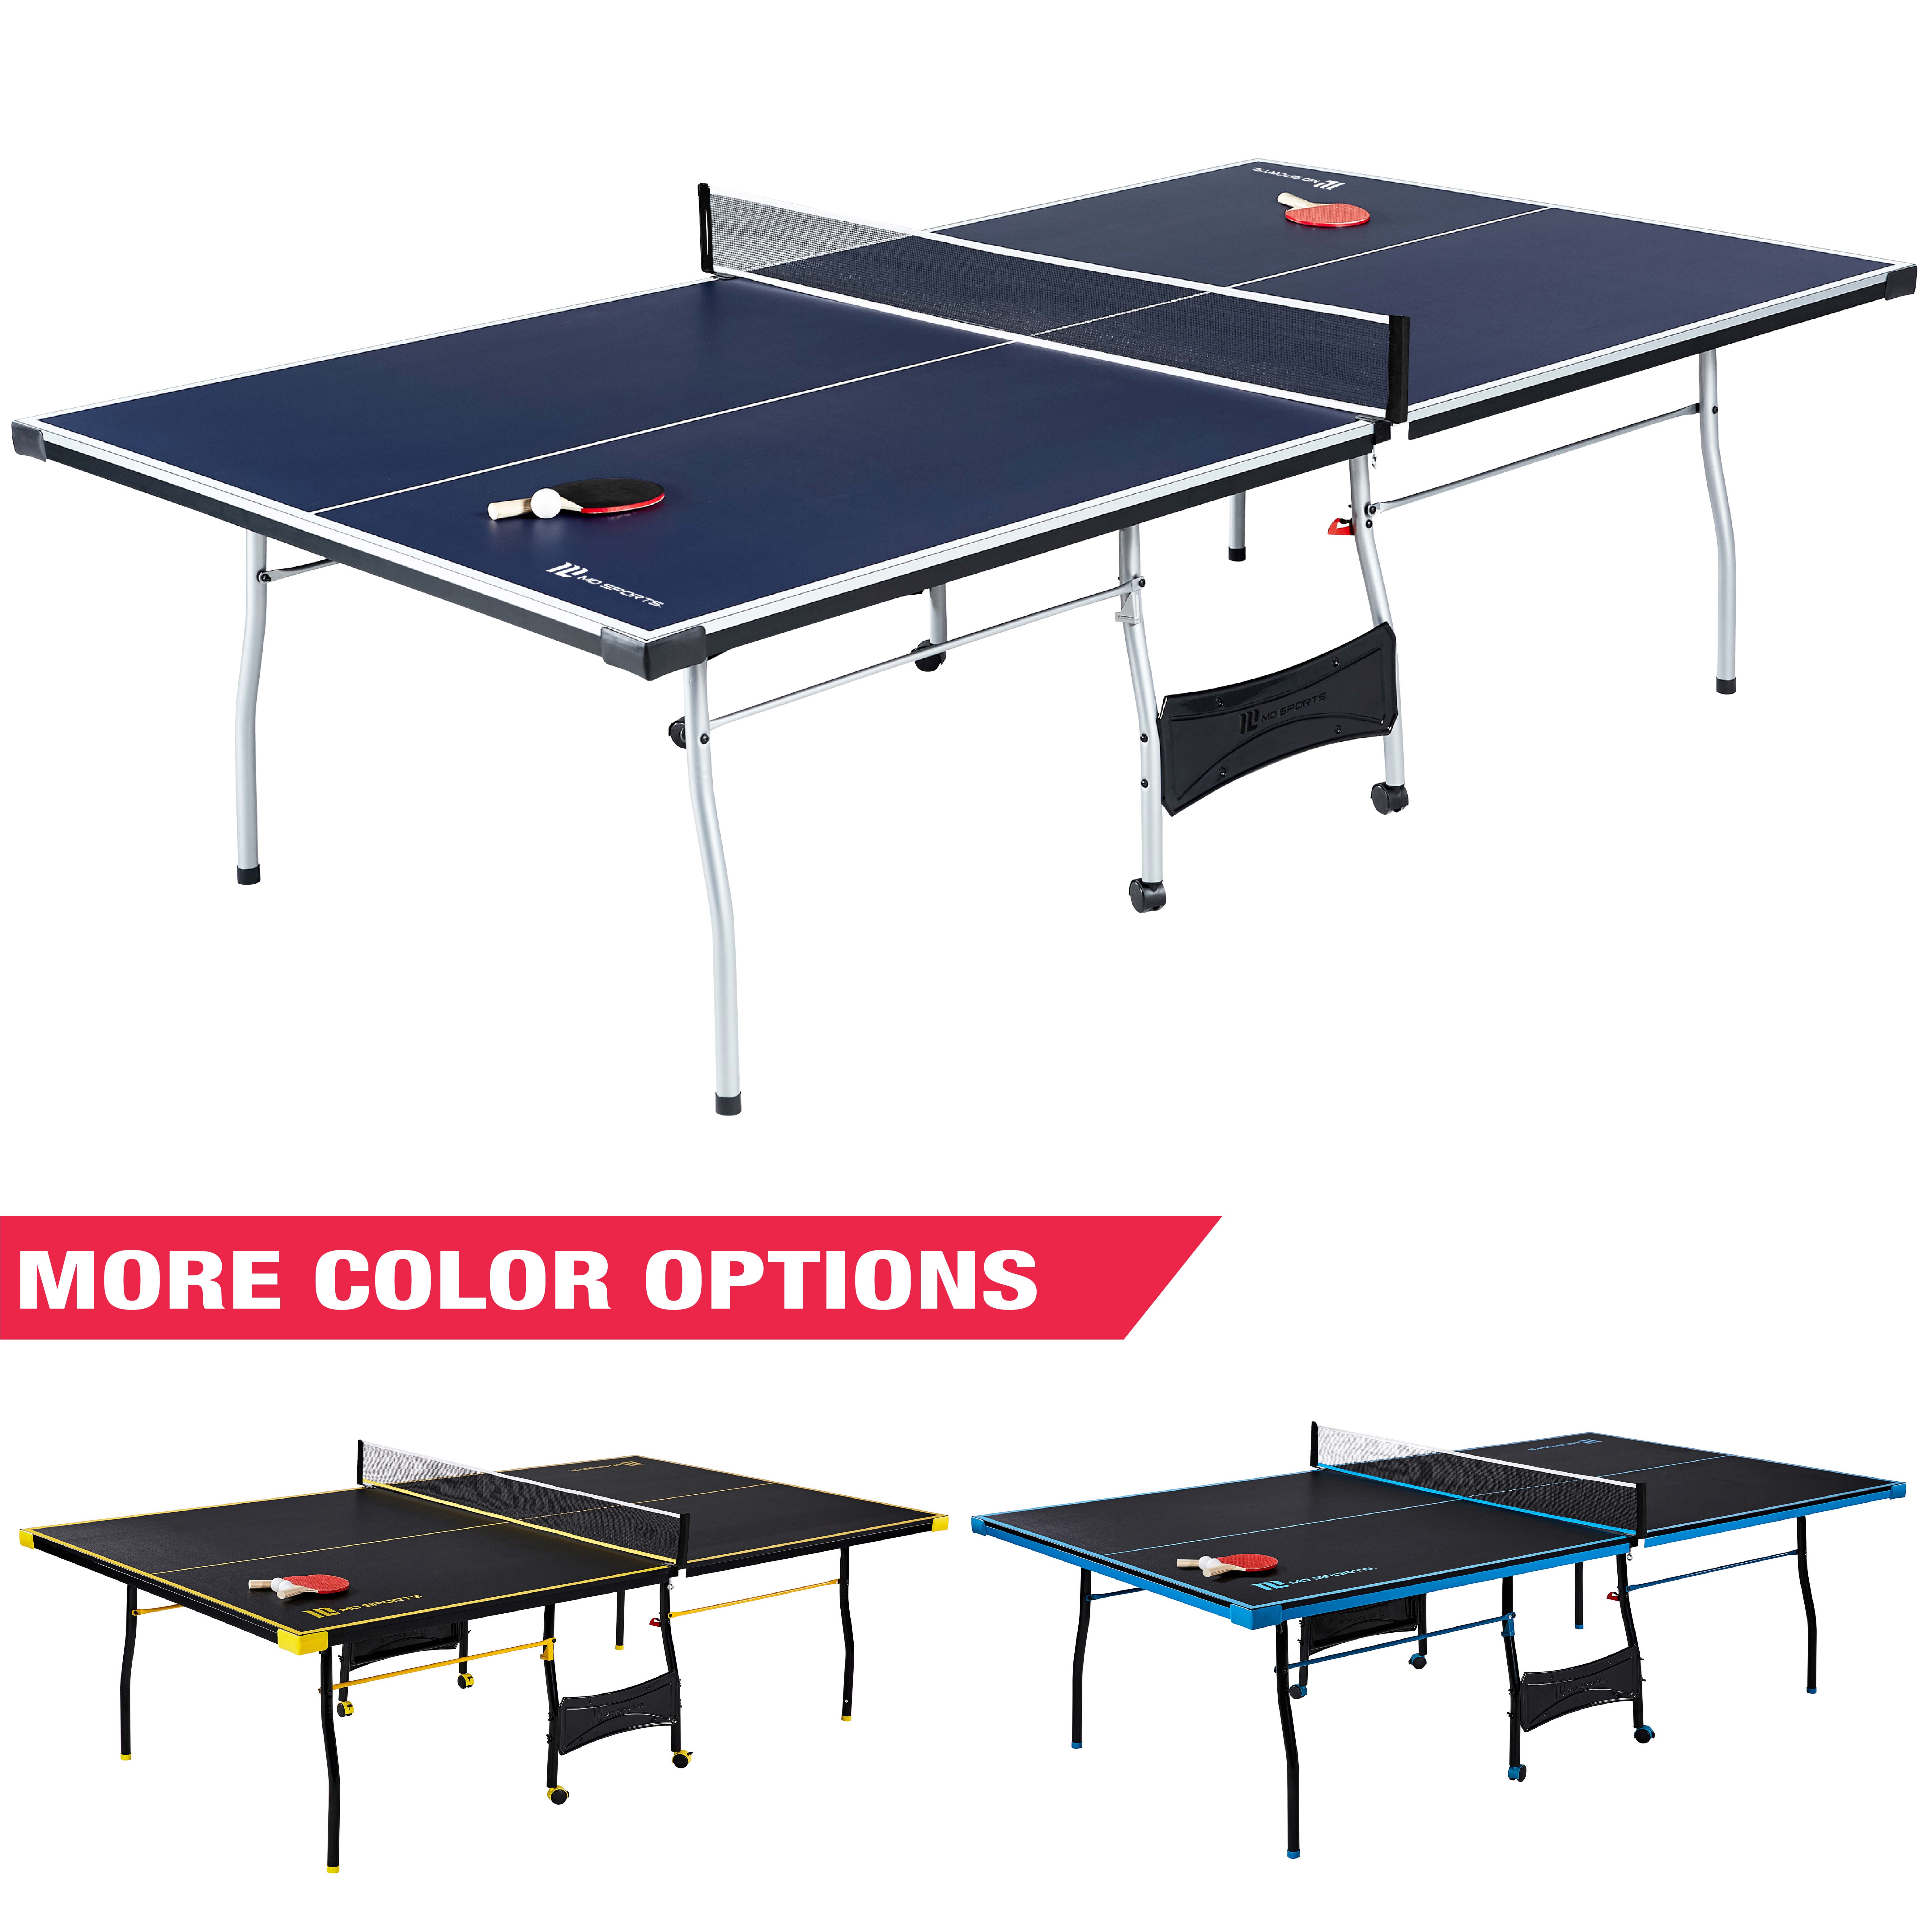 MD Sports Official Size 15 mm 4 Piece Indoor Table Tennis, Accessories Included - image 3 of 13